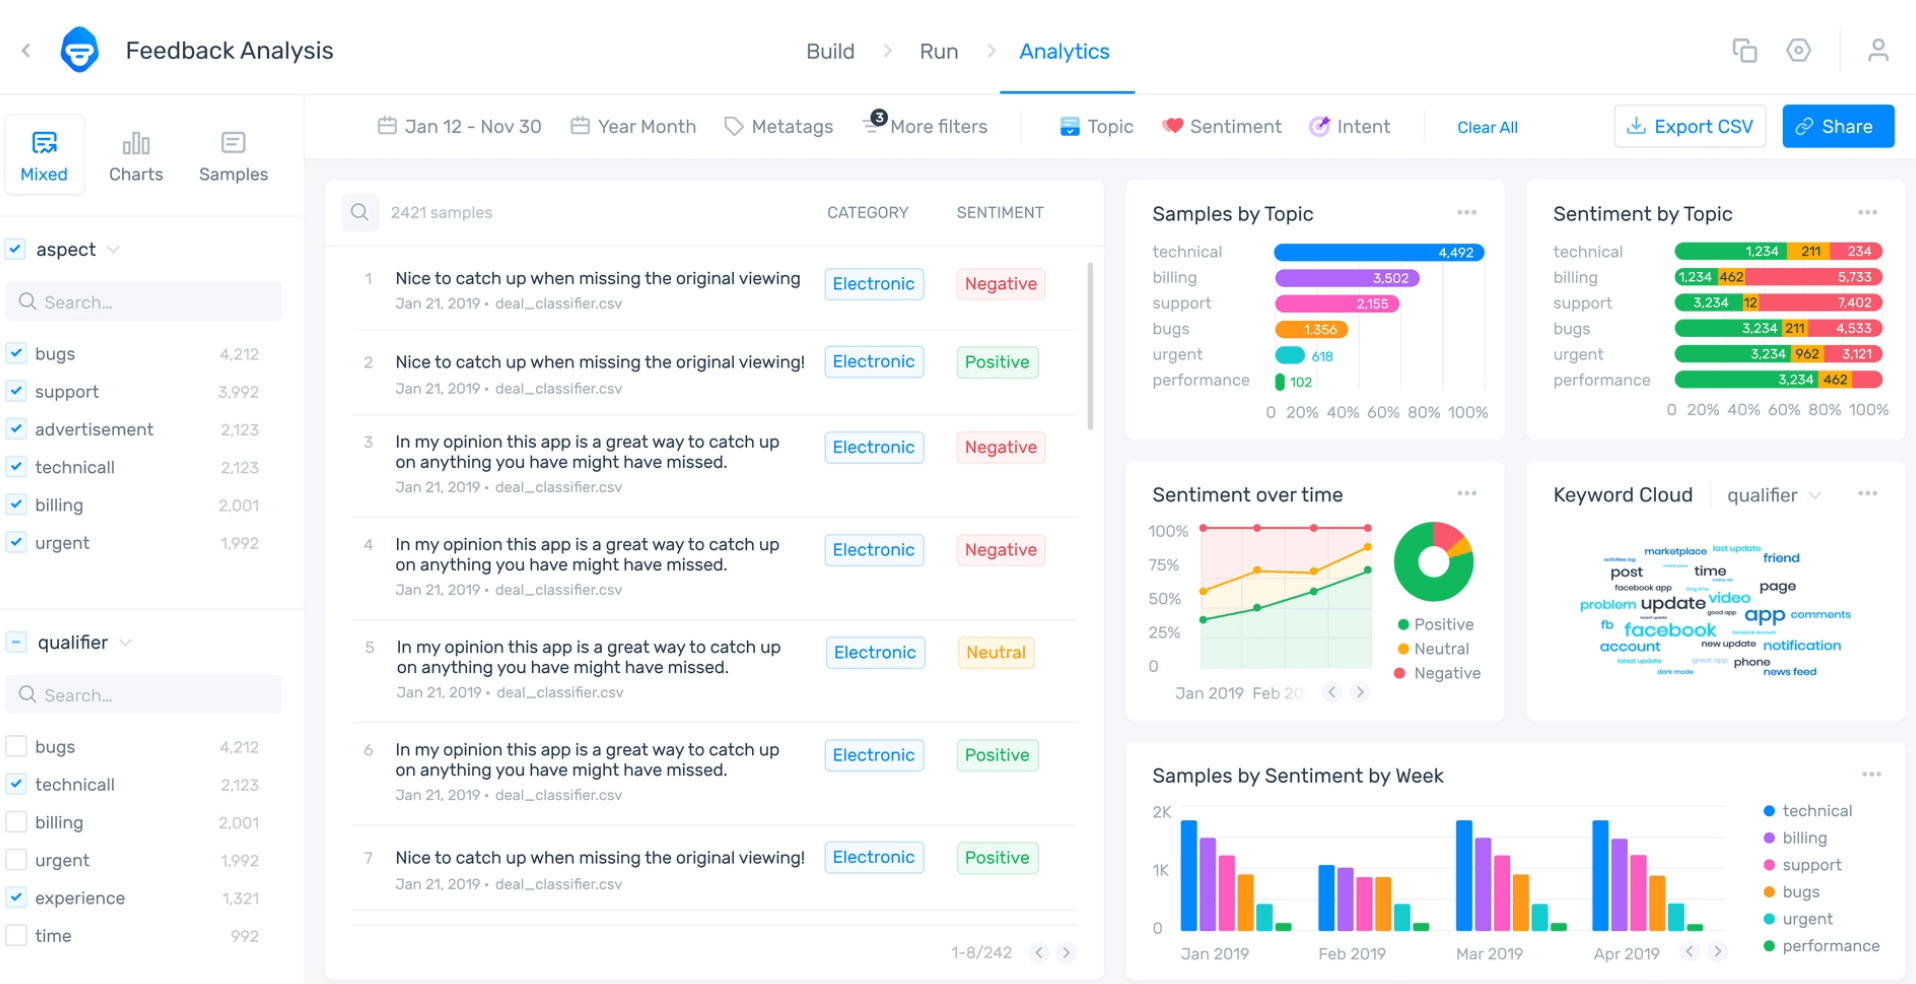 MonkeyLearns' NPS analysis dashboard showing results by sentiment, keyword, and topic